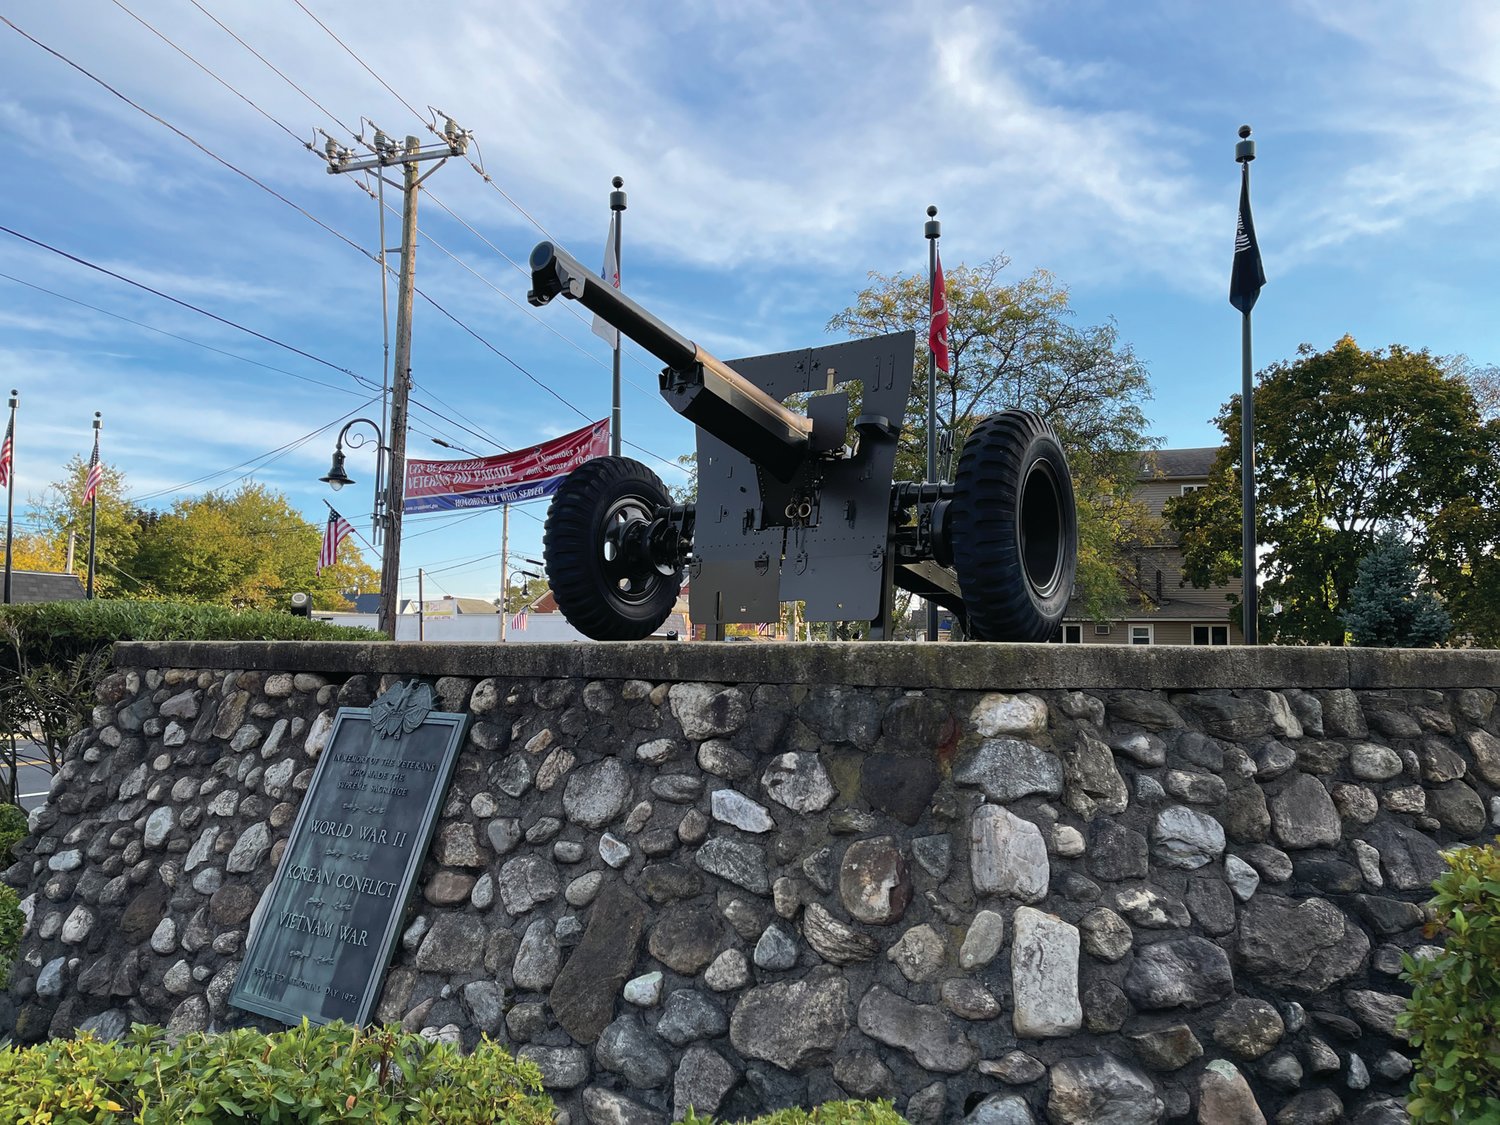 READY FOR A PARADE: The city’s first Veterans Day Parade in several years will proceed from the corner of Park and Doric avenues to the war memorial at the intersection of Rolfe Square, Park Avenue and Pontiac Avenue. A banner advertising the parade is seen behind the cannon at the memorial.